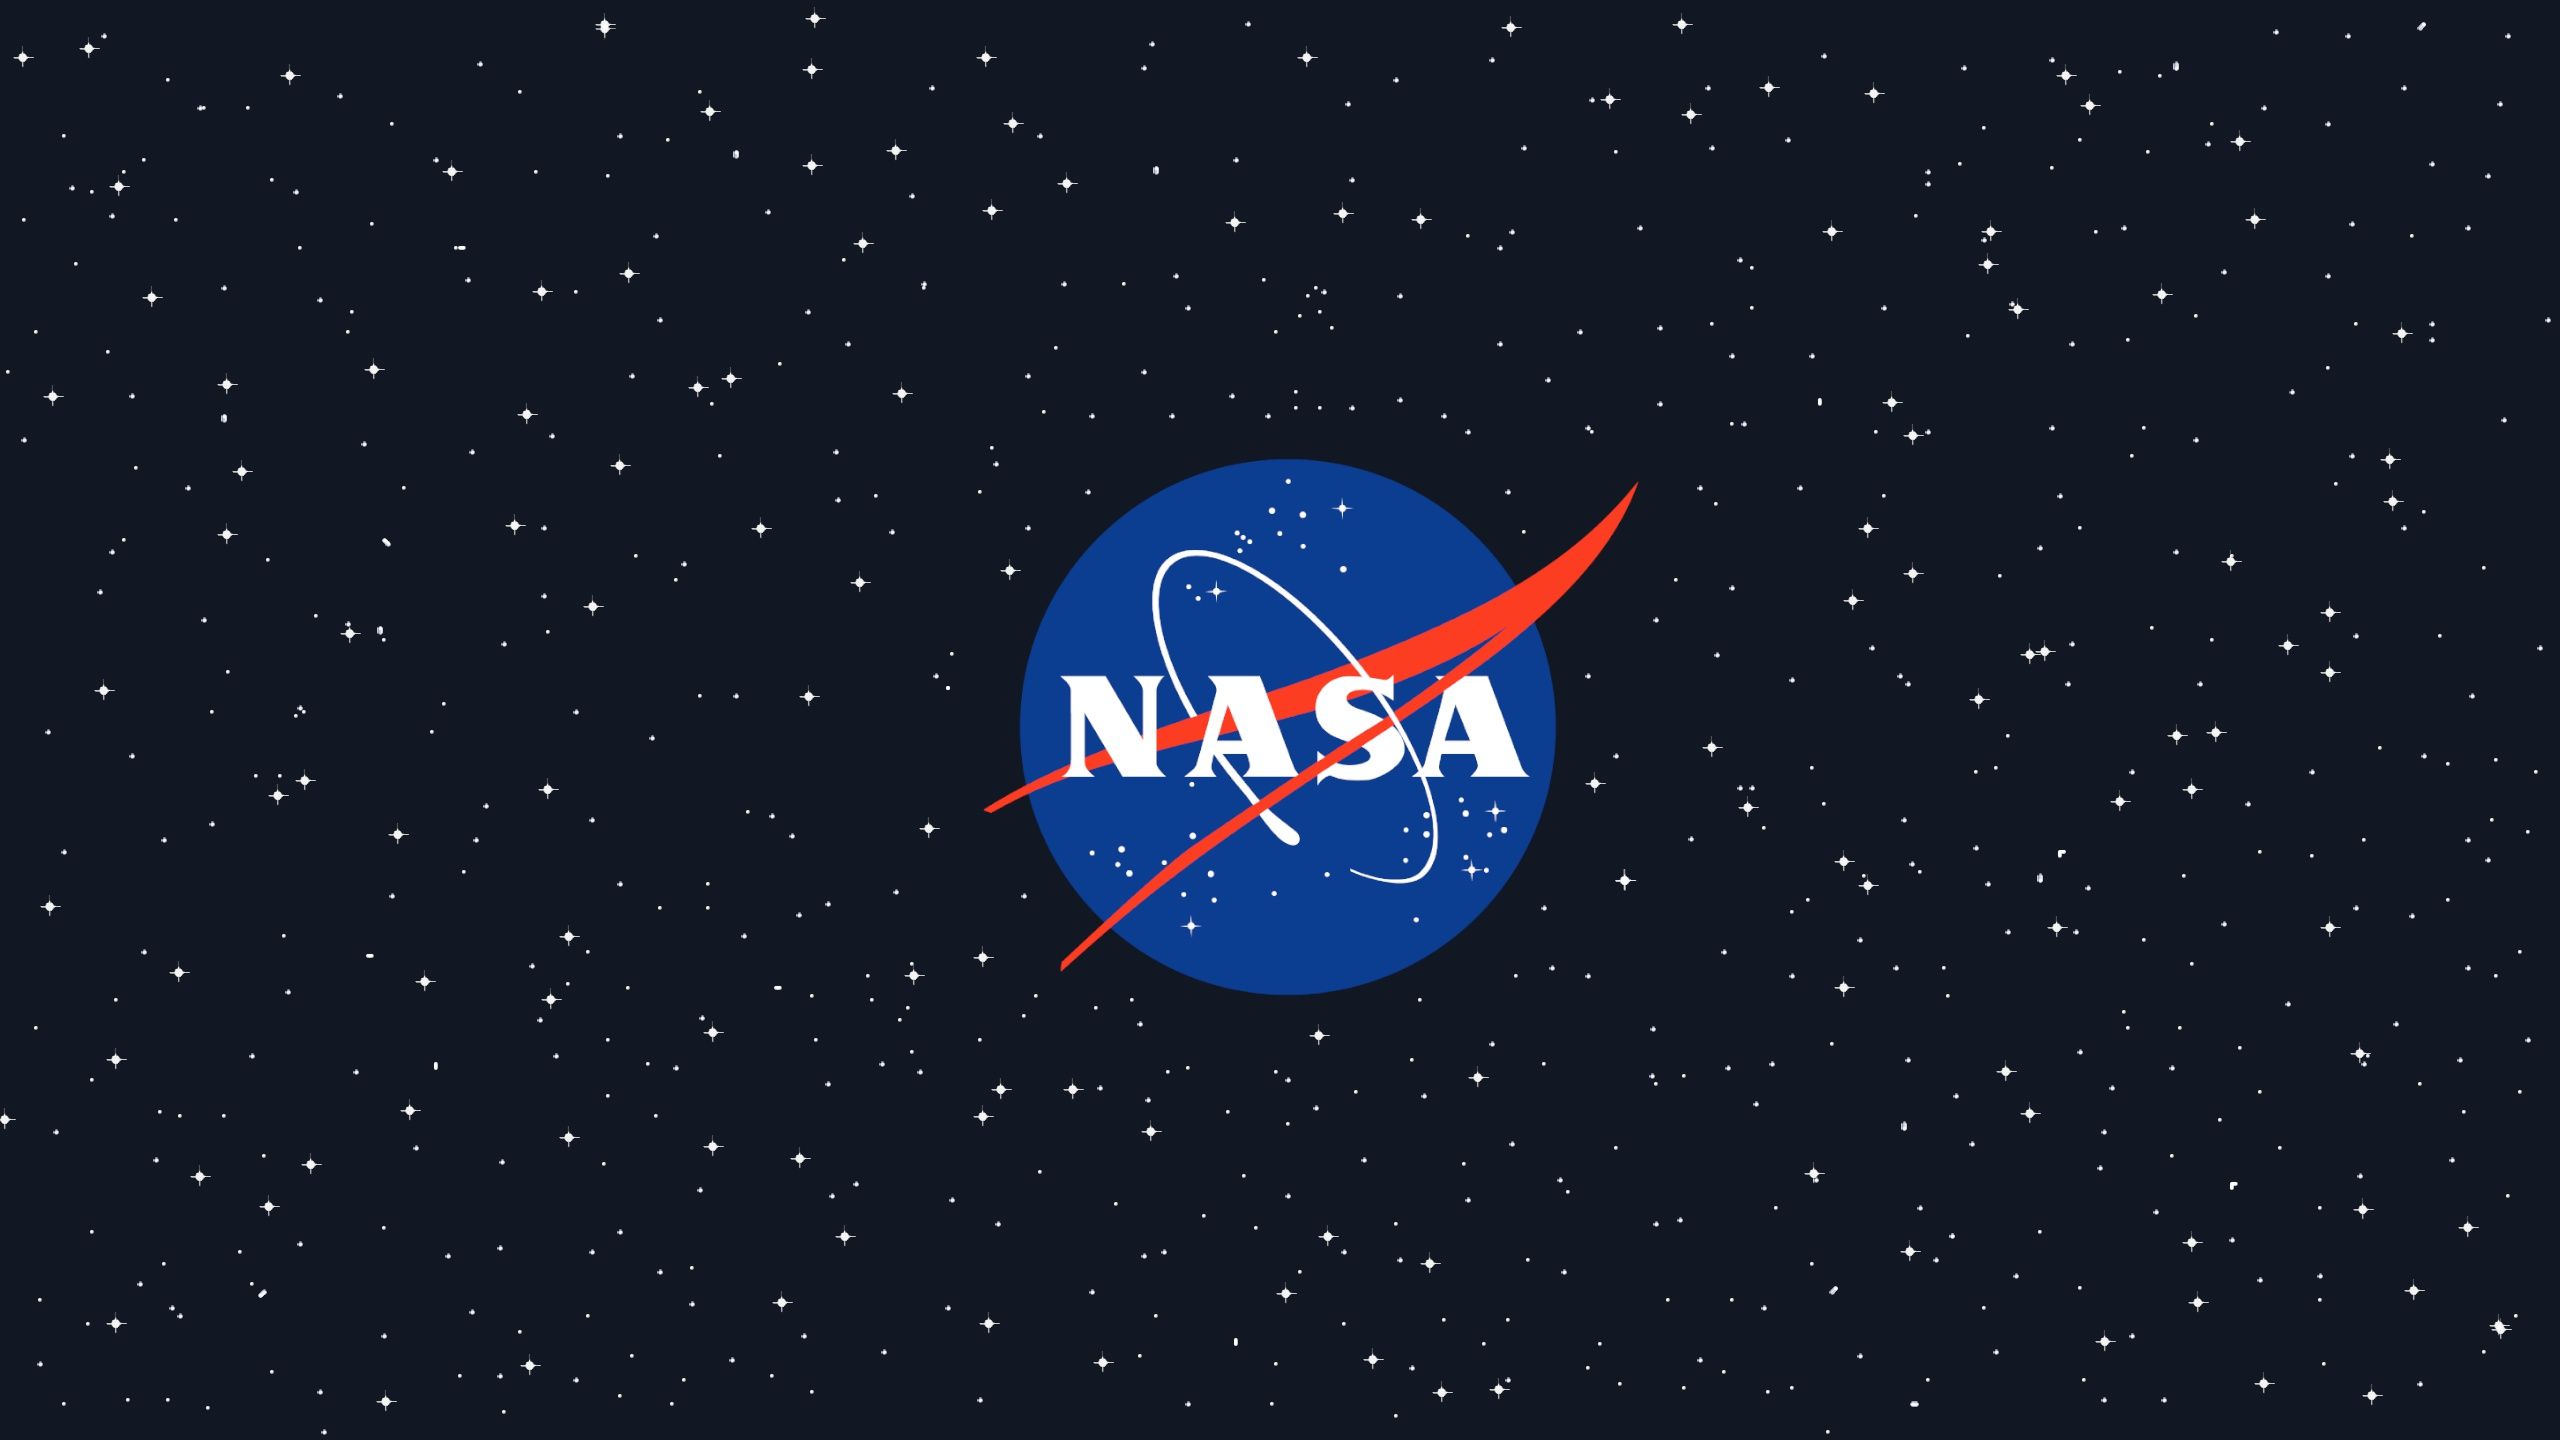 This image is a black background with white stars. In the center of the image is the NASA logo, which is a blue circle with the word 